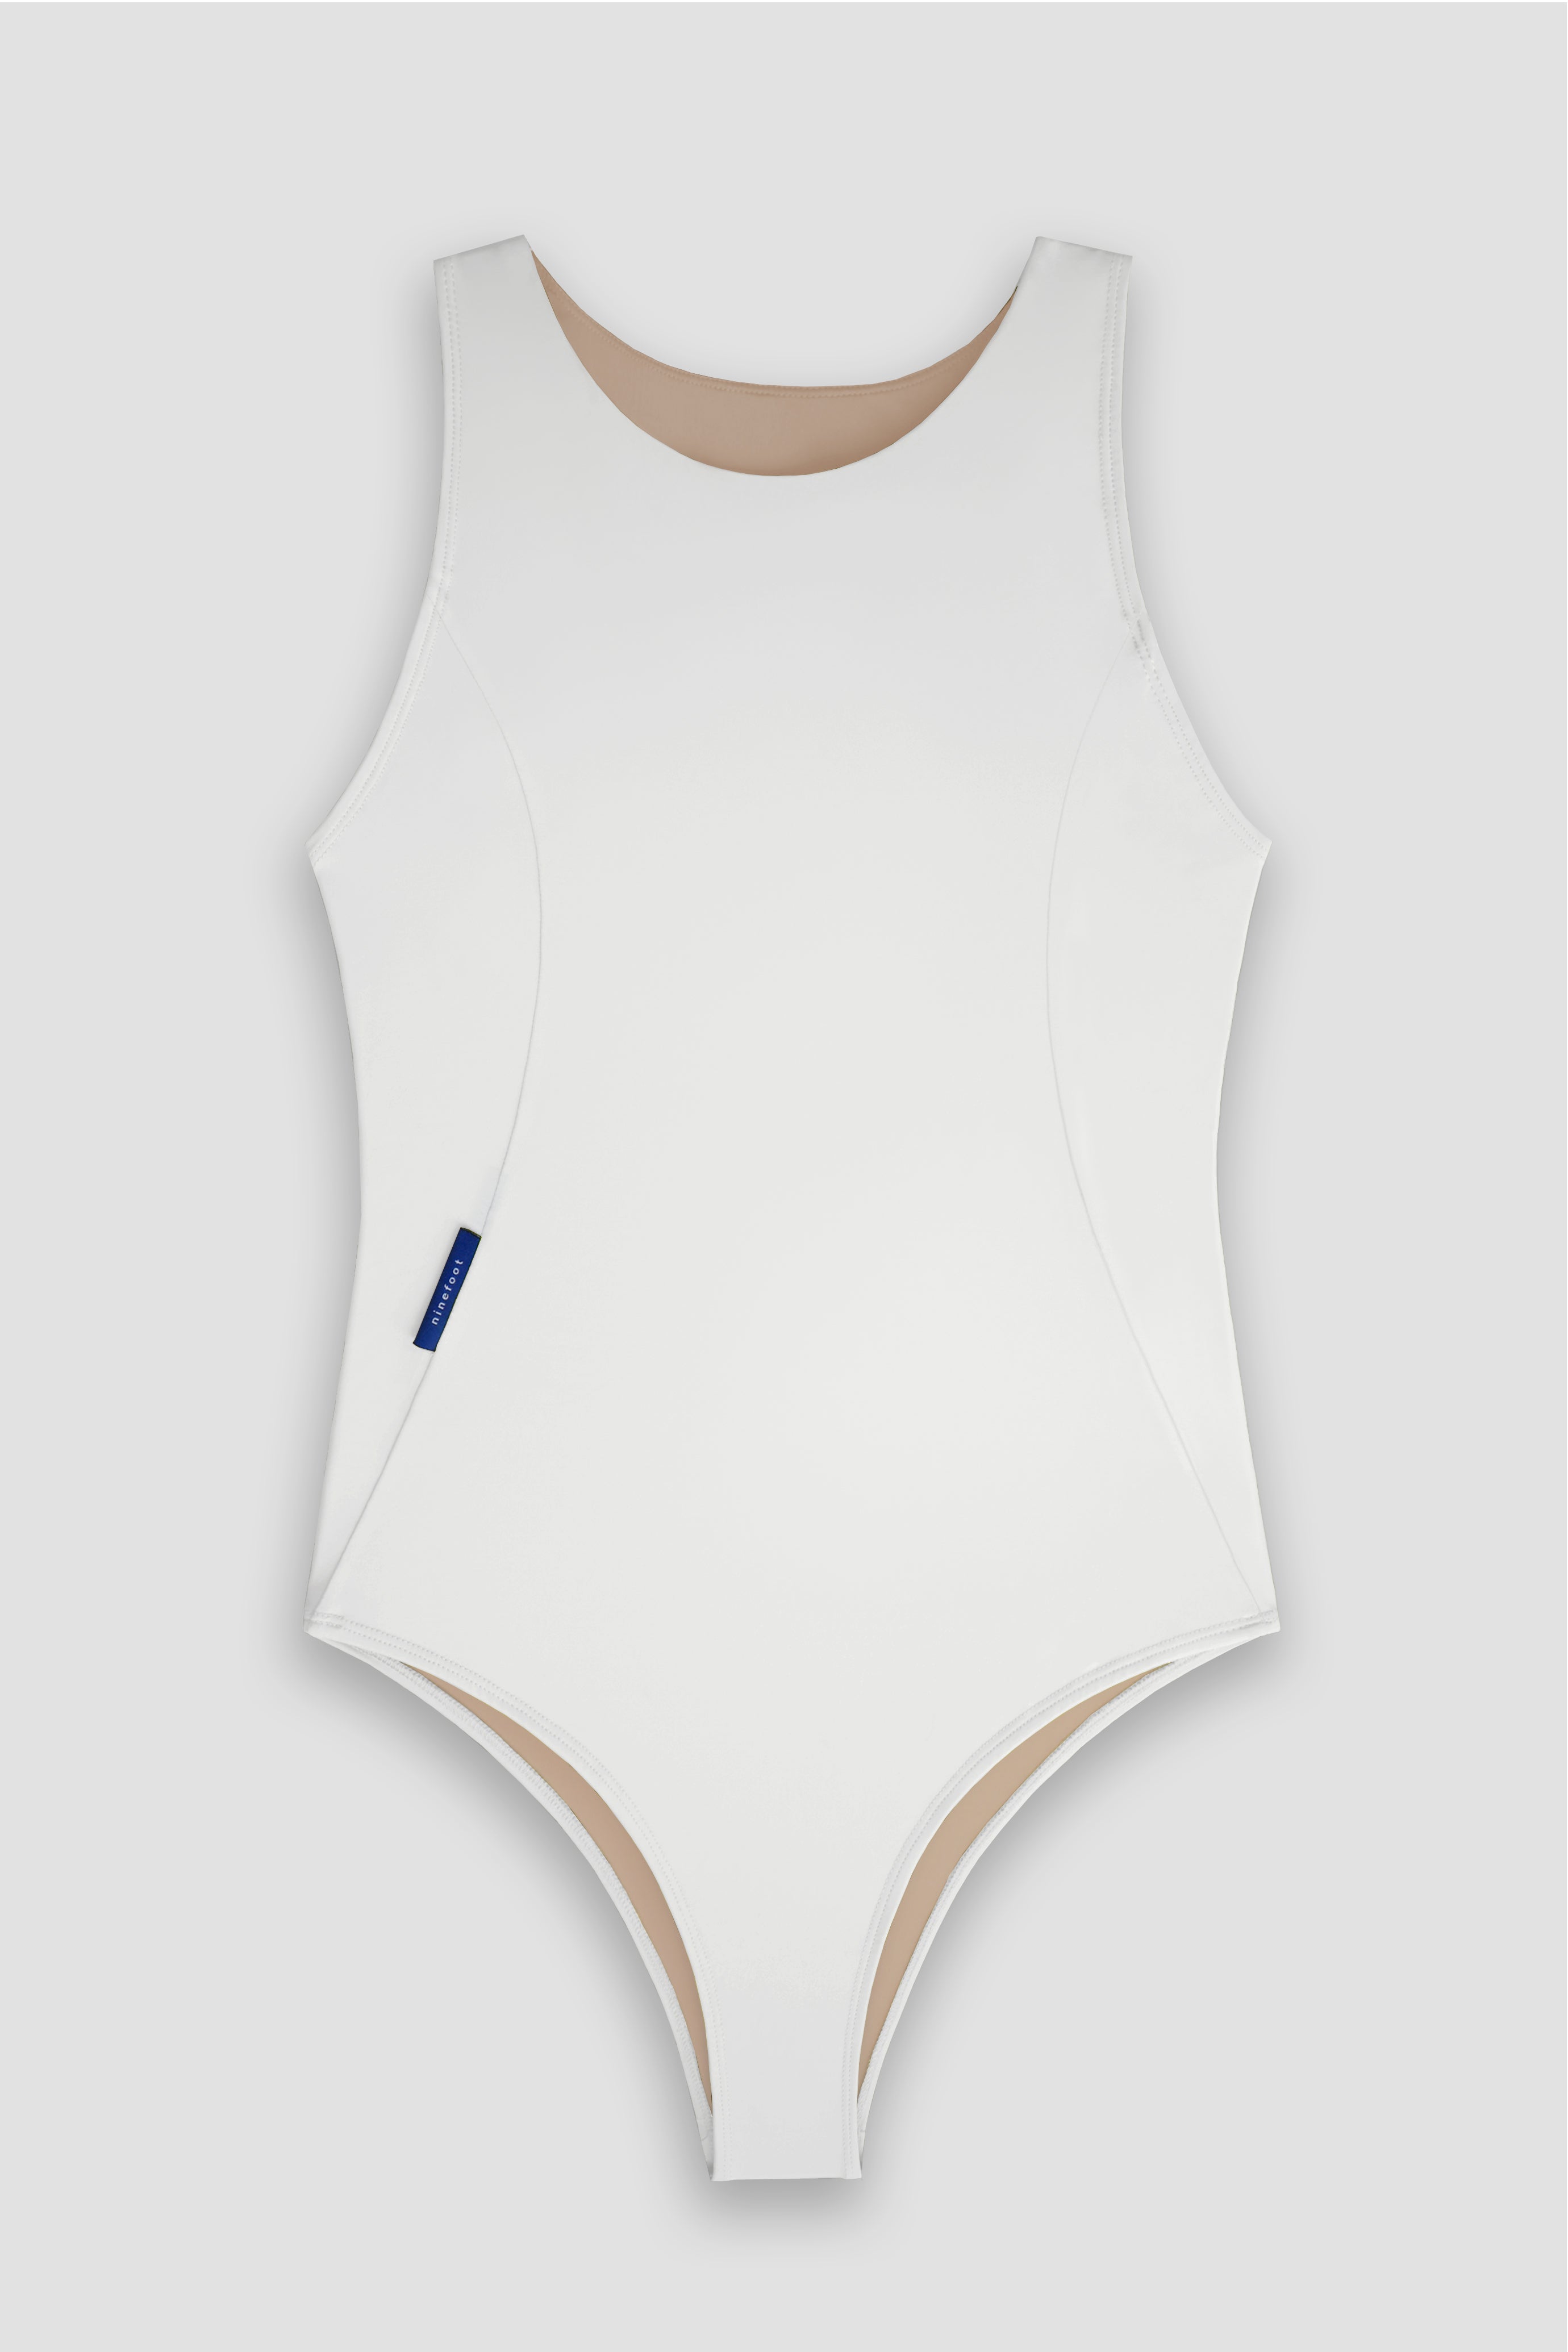 Krui Onepiece Surf Swimsuit in White Flat photo front